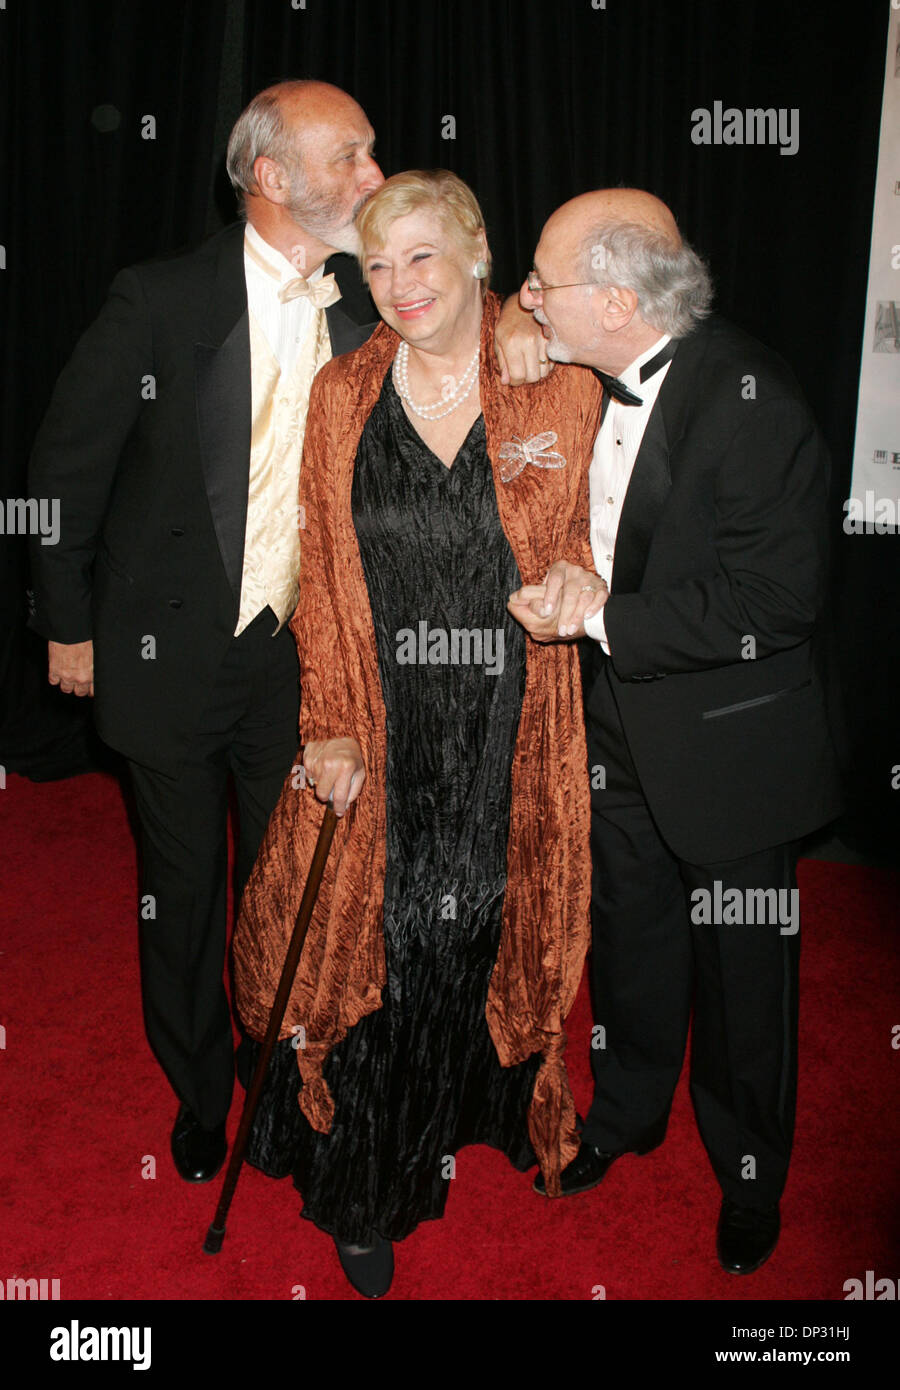 Jun 15, 2006; New York, NY, USA; Inductees PAUL STOOKEY, MARY TRAVERS and PETER YARROW of 'Peter, Paul and Mary' at the arrivals for the 2006 Songwriters Hall of Fame Awards held at the Marriott Marquis Hotel. Mandatory Credit: Photo by Nancy Kaszerman/ZUMA Press. (©) Copyright 2006 by Nancy Kaszerman Stock Photo